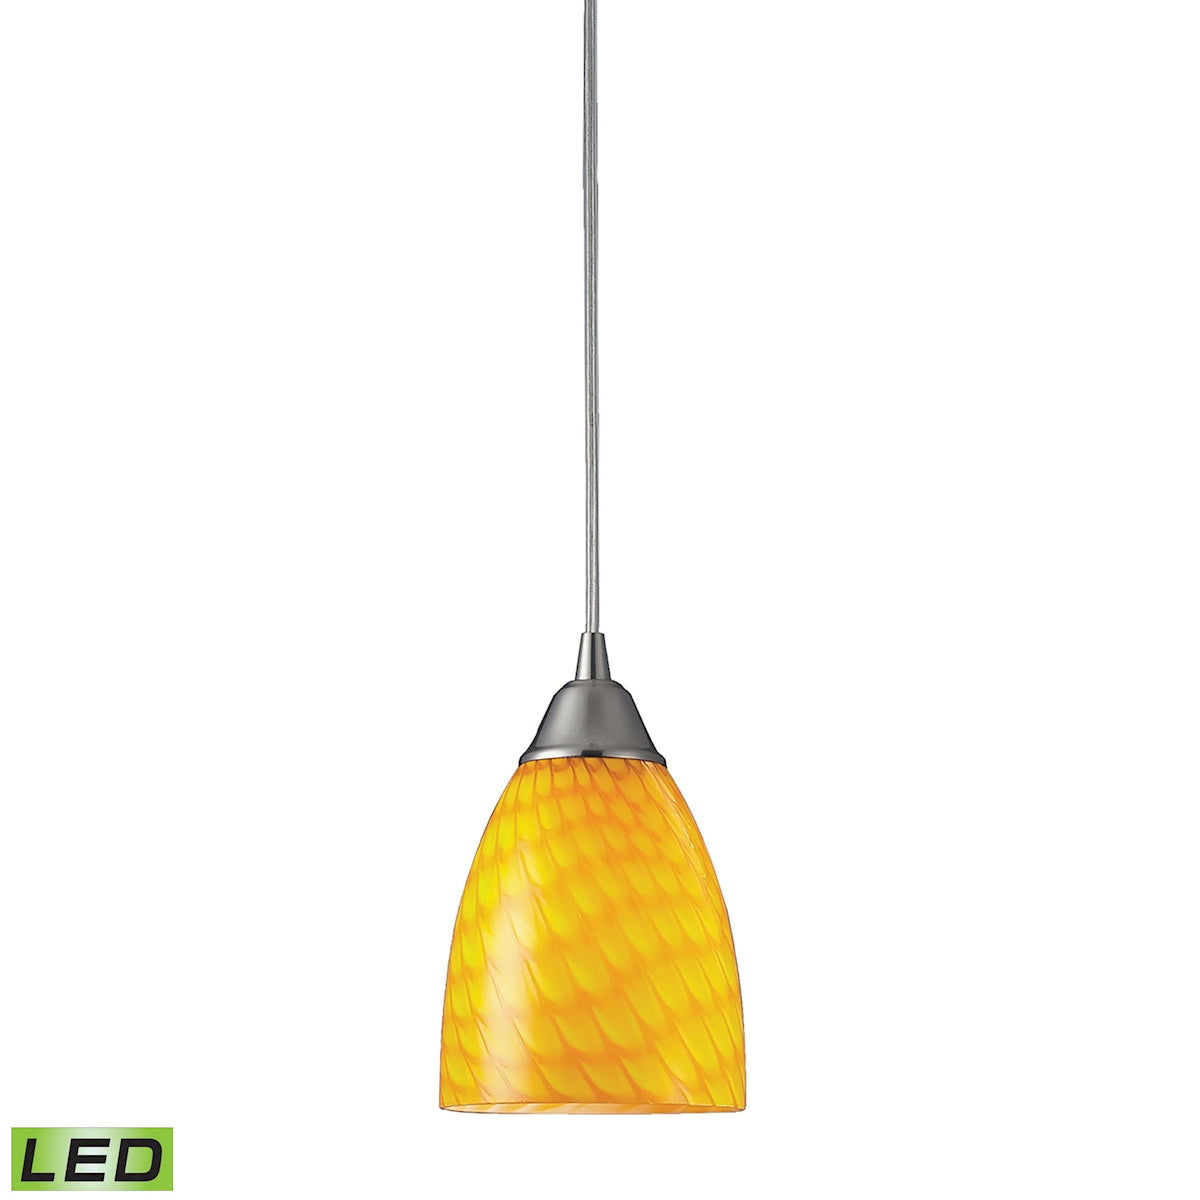 ELK Lighting 416-1CN-LED Arco Baleno 1-Light Mini Pendant in Satin Nickel with Canary Glass - Includes LED Bulb